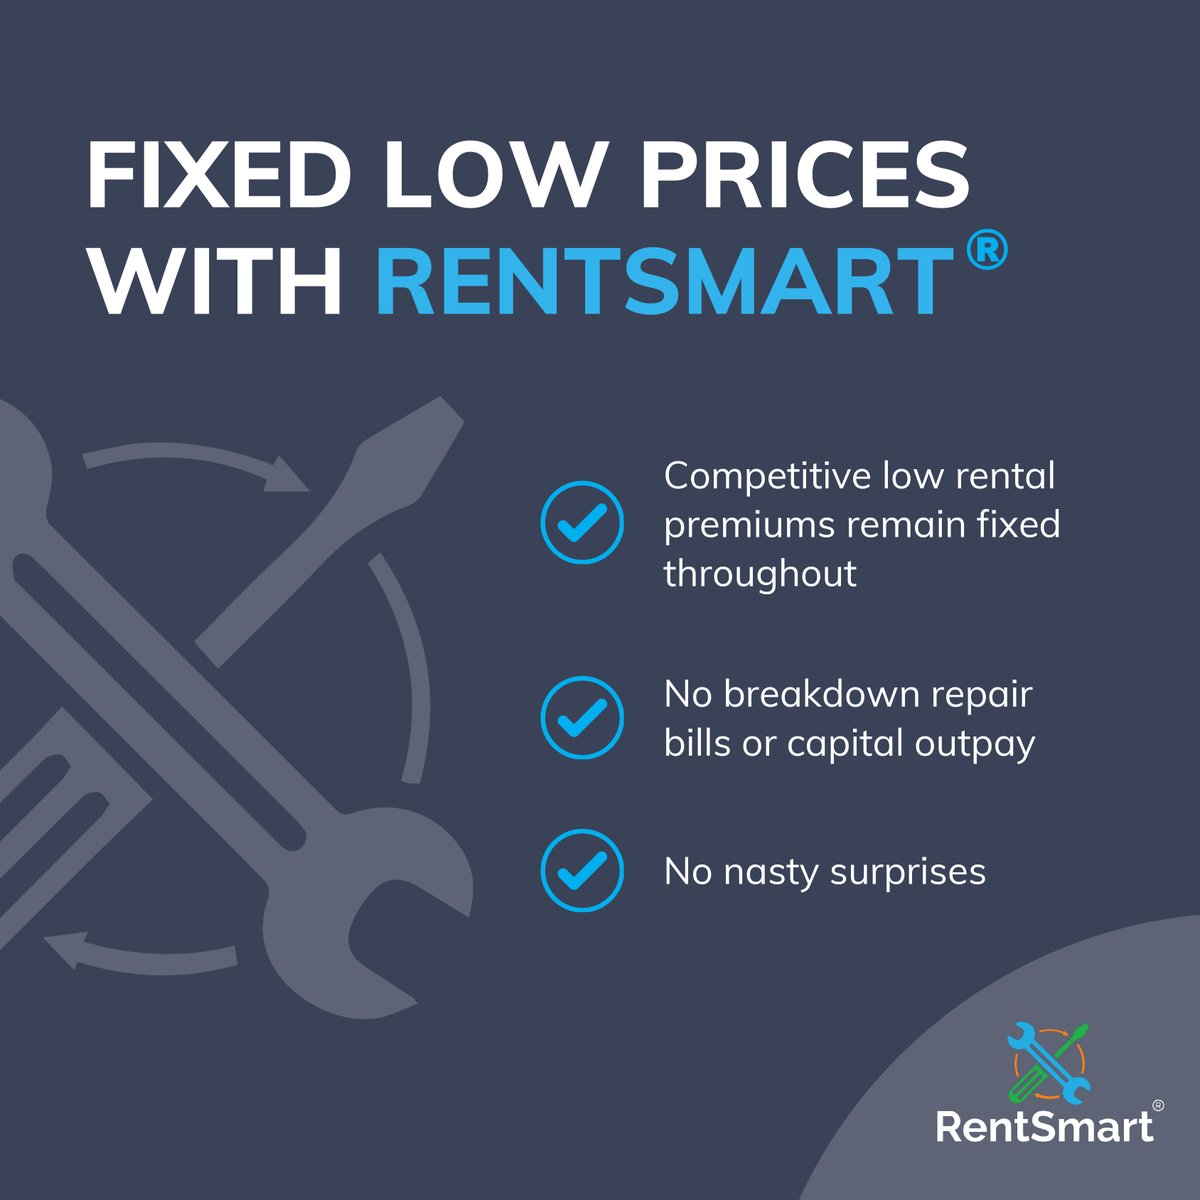 Get complete peace of mind with RentSmart®. 

Our low cost rental premiums are fixed & fully inclusive of all breakdowns including parts, labour & travel throughout.

Find out more > opl-ltd.co.uk/services/rental

#commerciallaundry #laundryequipment #infectioncontrol #laundrysolutions